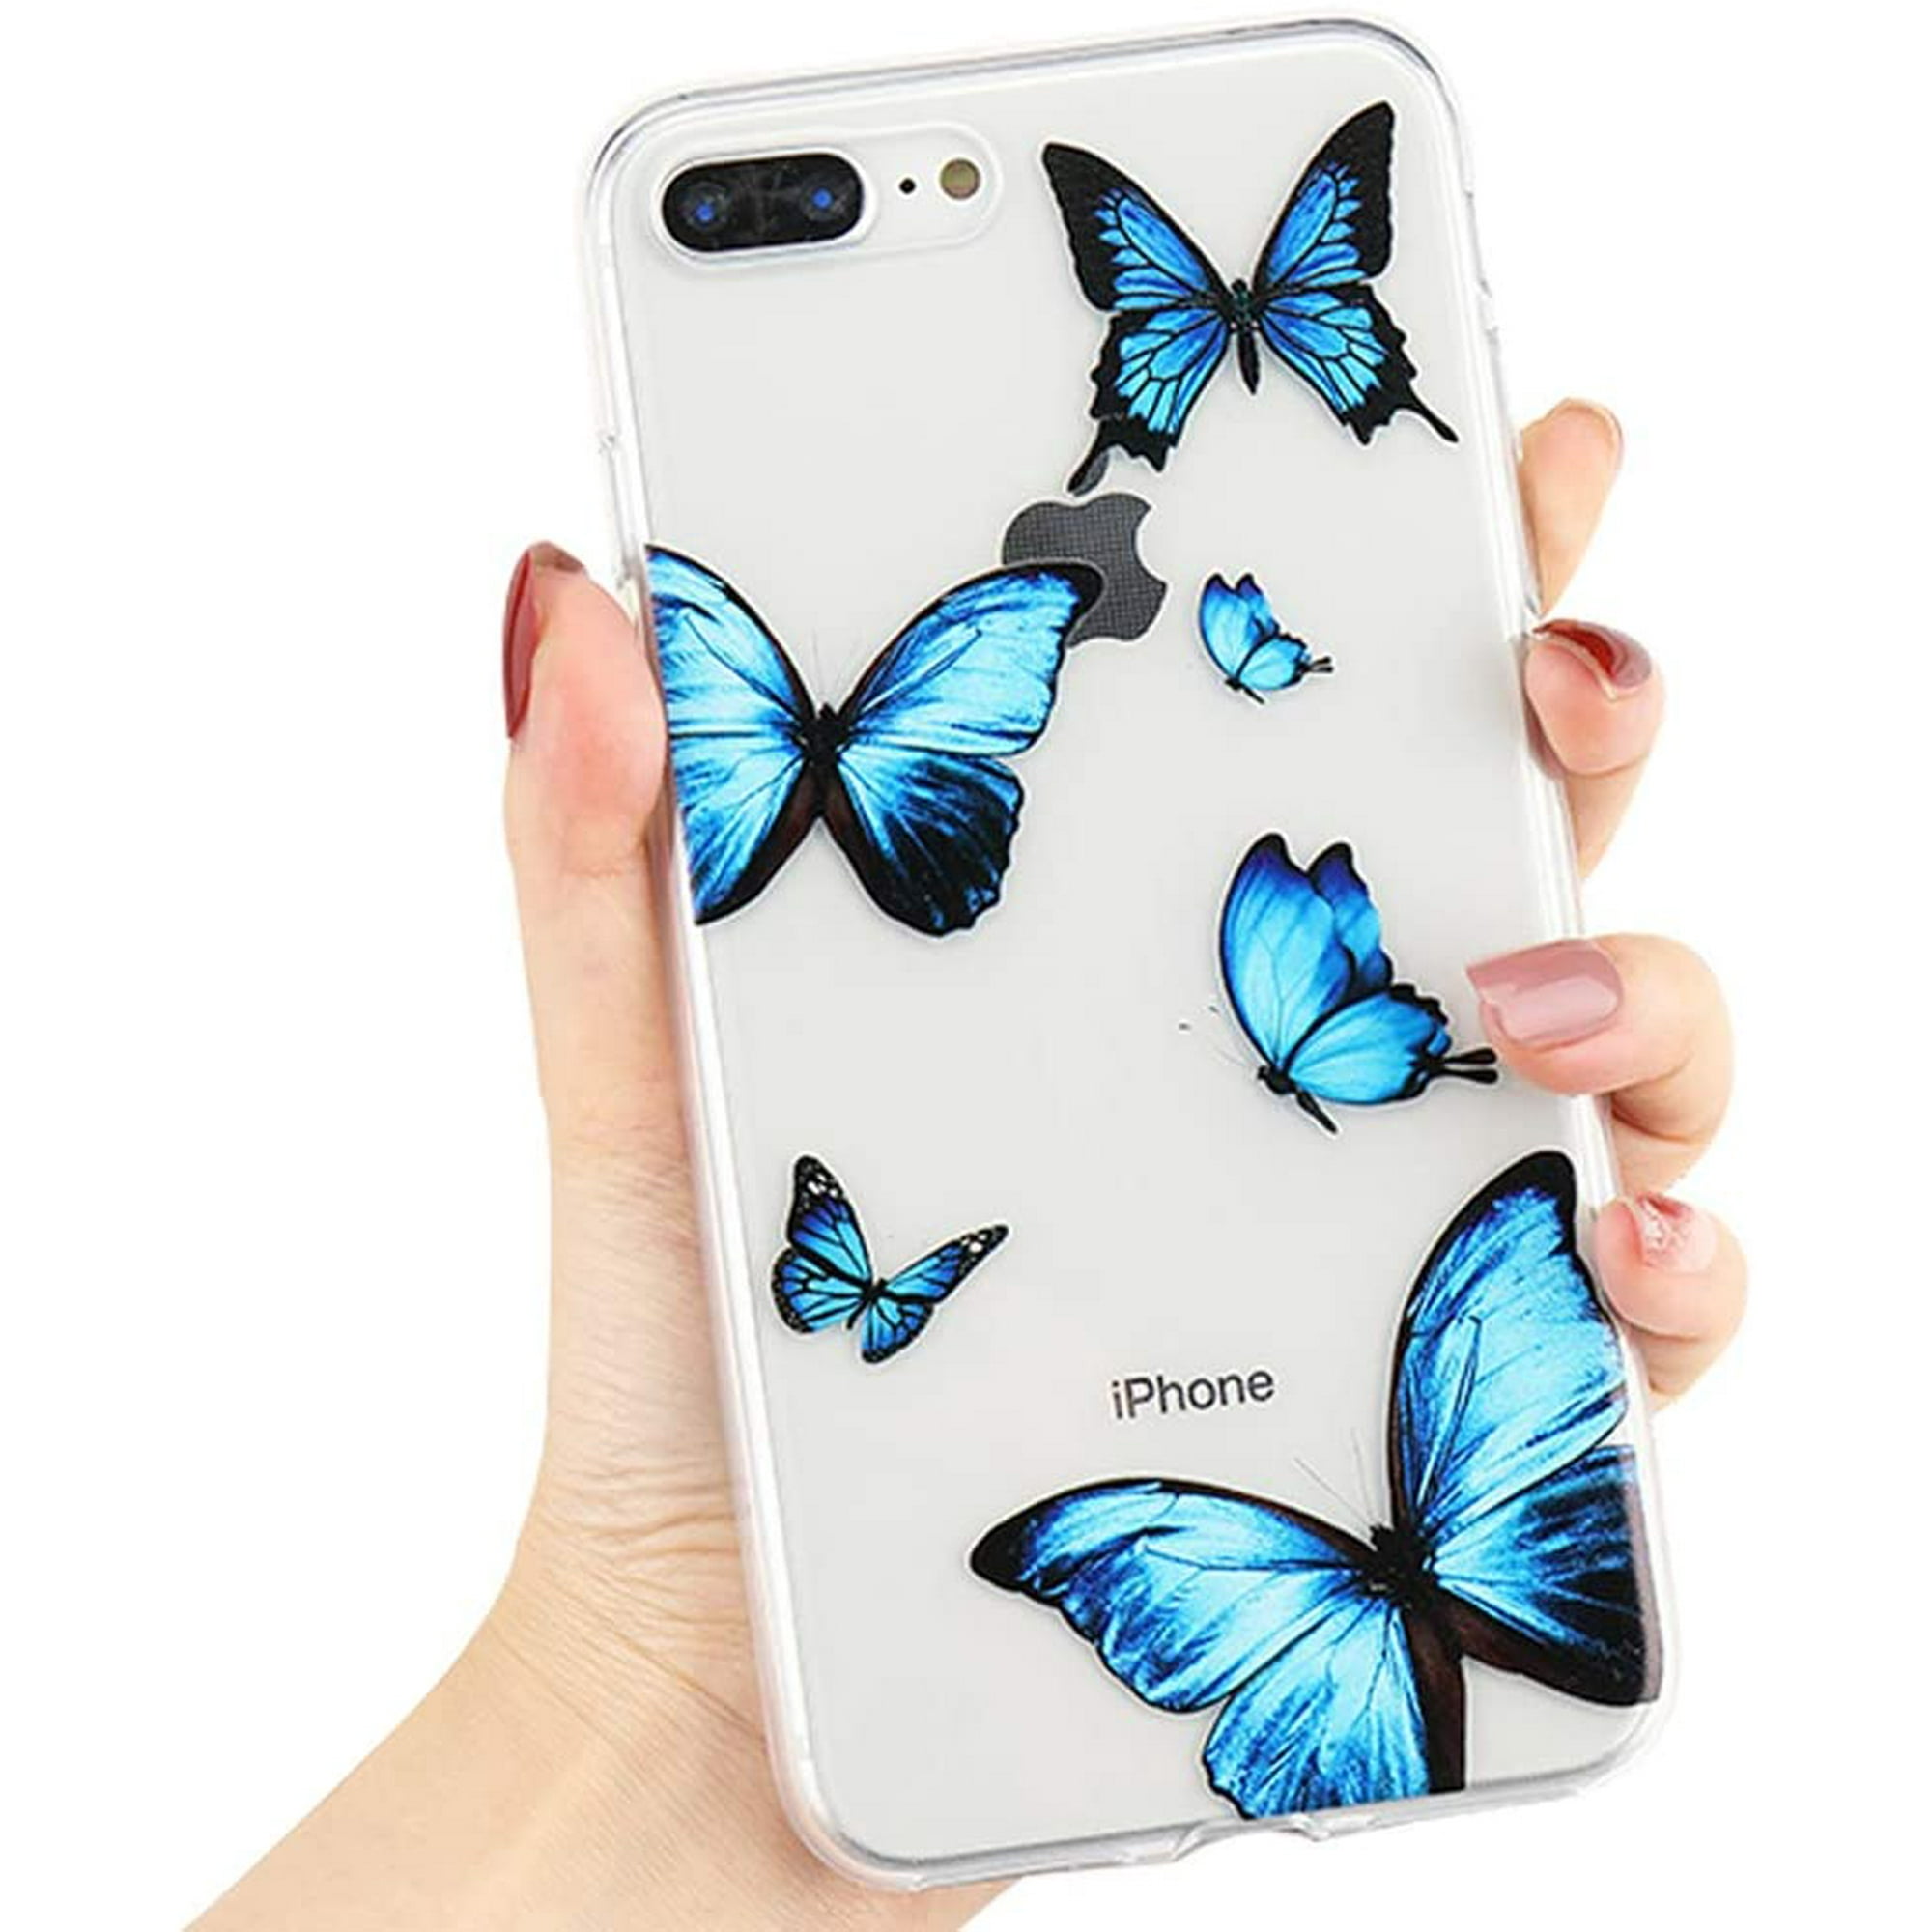 Girly Case For Iphone 6 Plus Iphone 6s Plus Case Cute Blue Butterfly Pattern Design Crystal Clear Girls Women Soft Tpu Rubber Shockproof Anti Scratch Protective Cover For Iphone 6 Plus 6s Plus